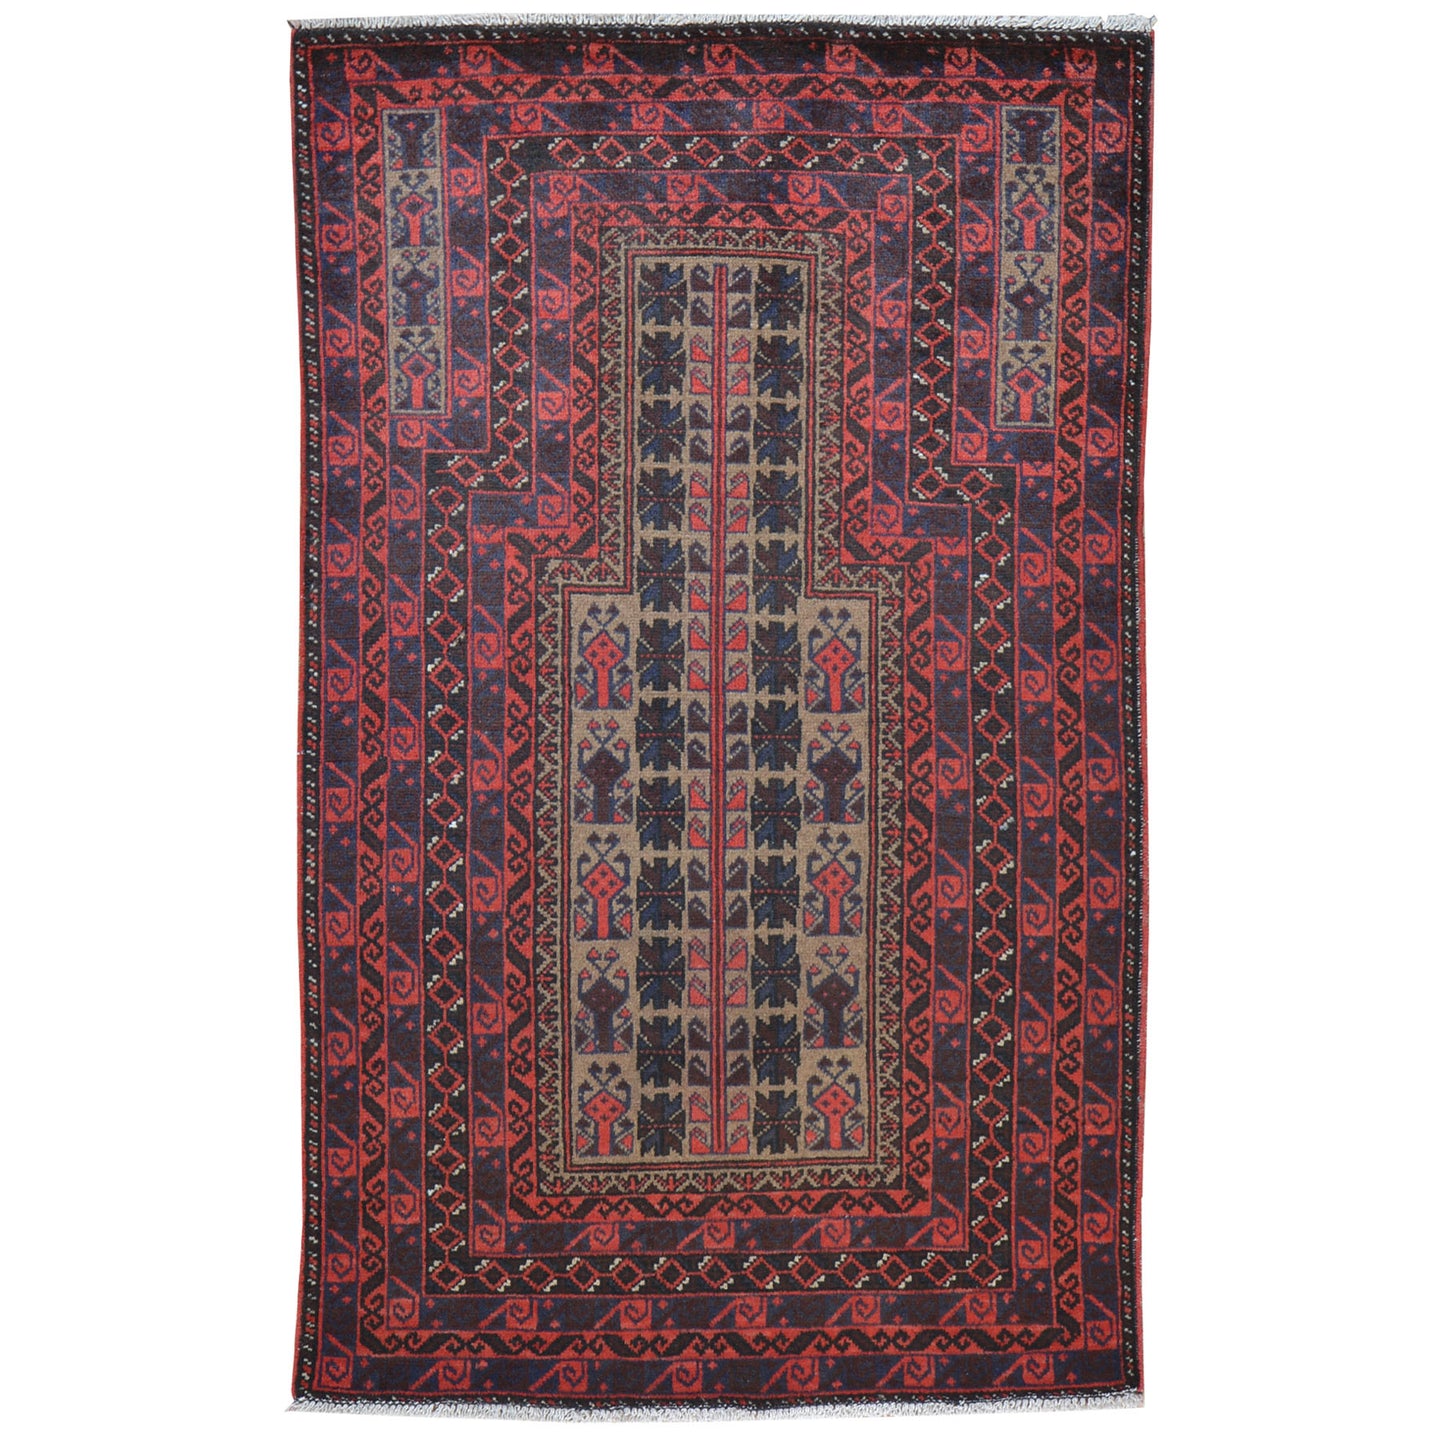 Hand-Knotted Baluch Prayer Handmade Wool Rug (Size 2.8 X 4.5) Brrsf-48